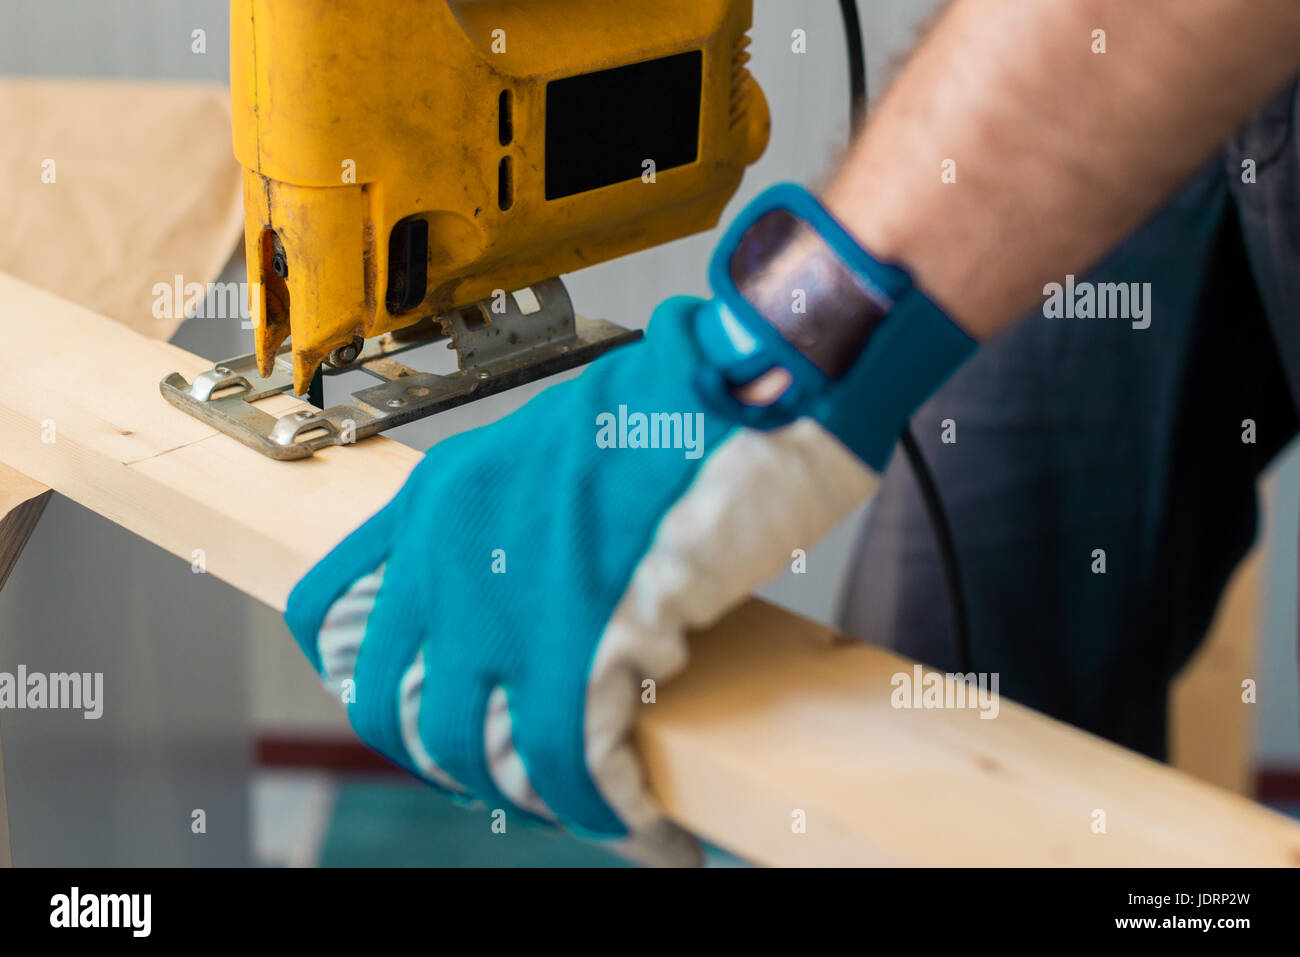 Carpenter handyman using electric handy saw on the woodwork workshop table Stock Photo